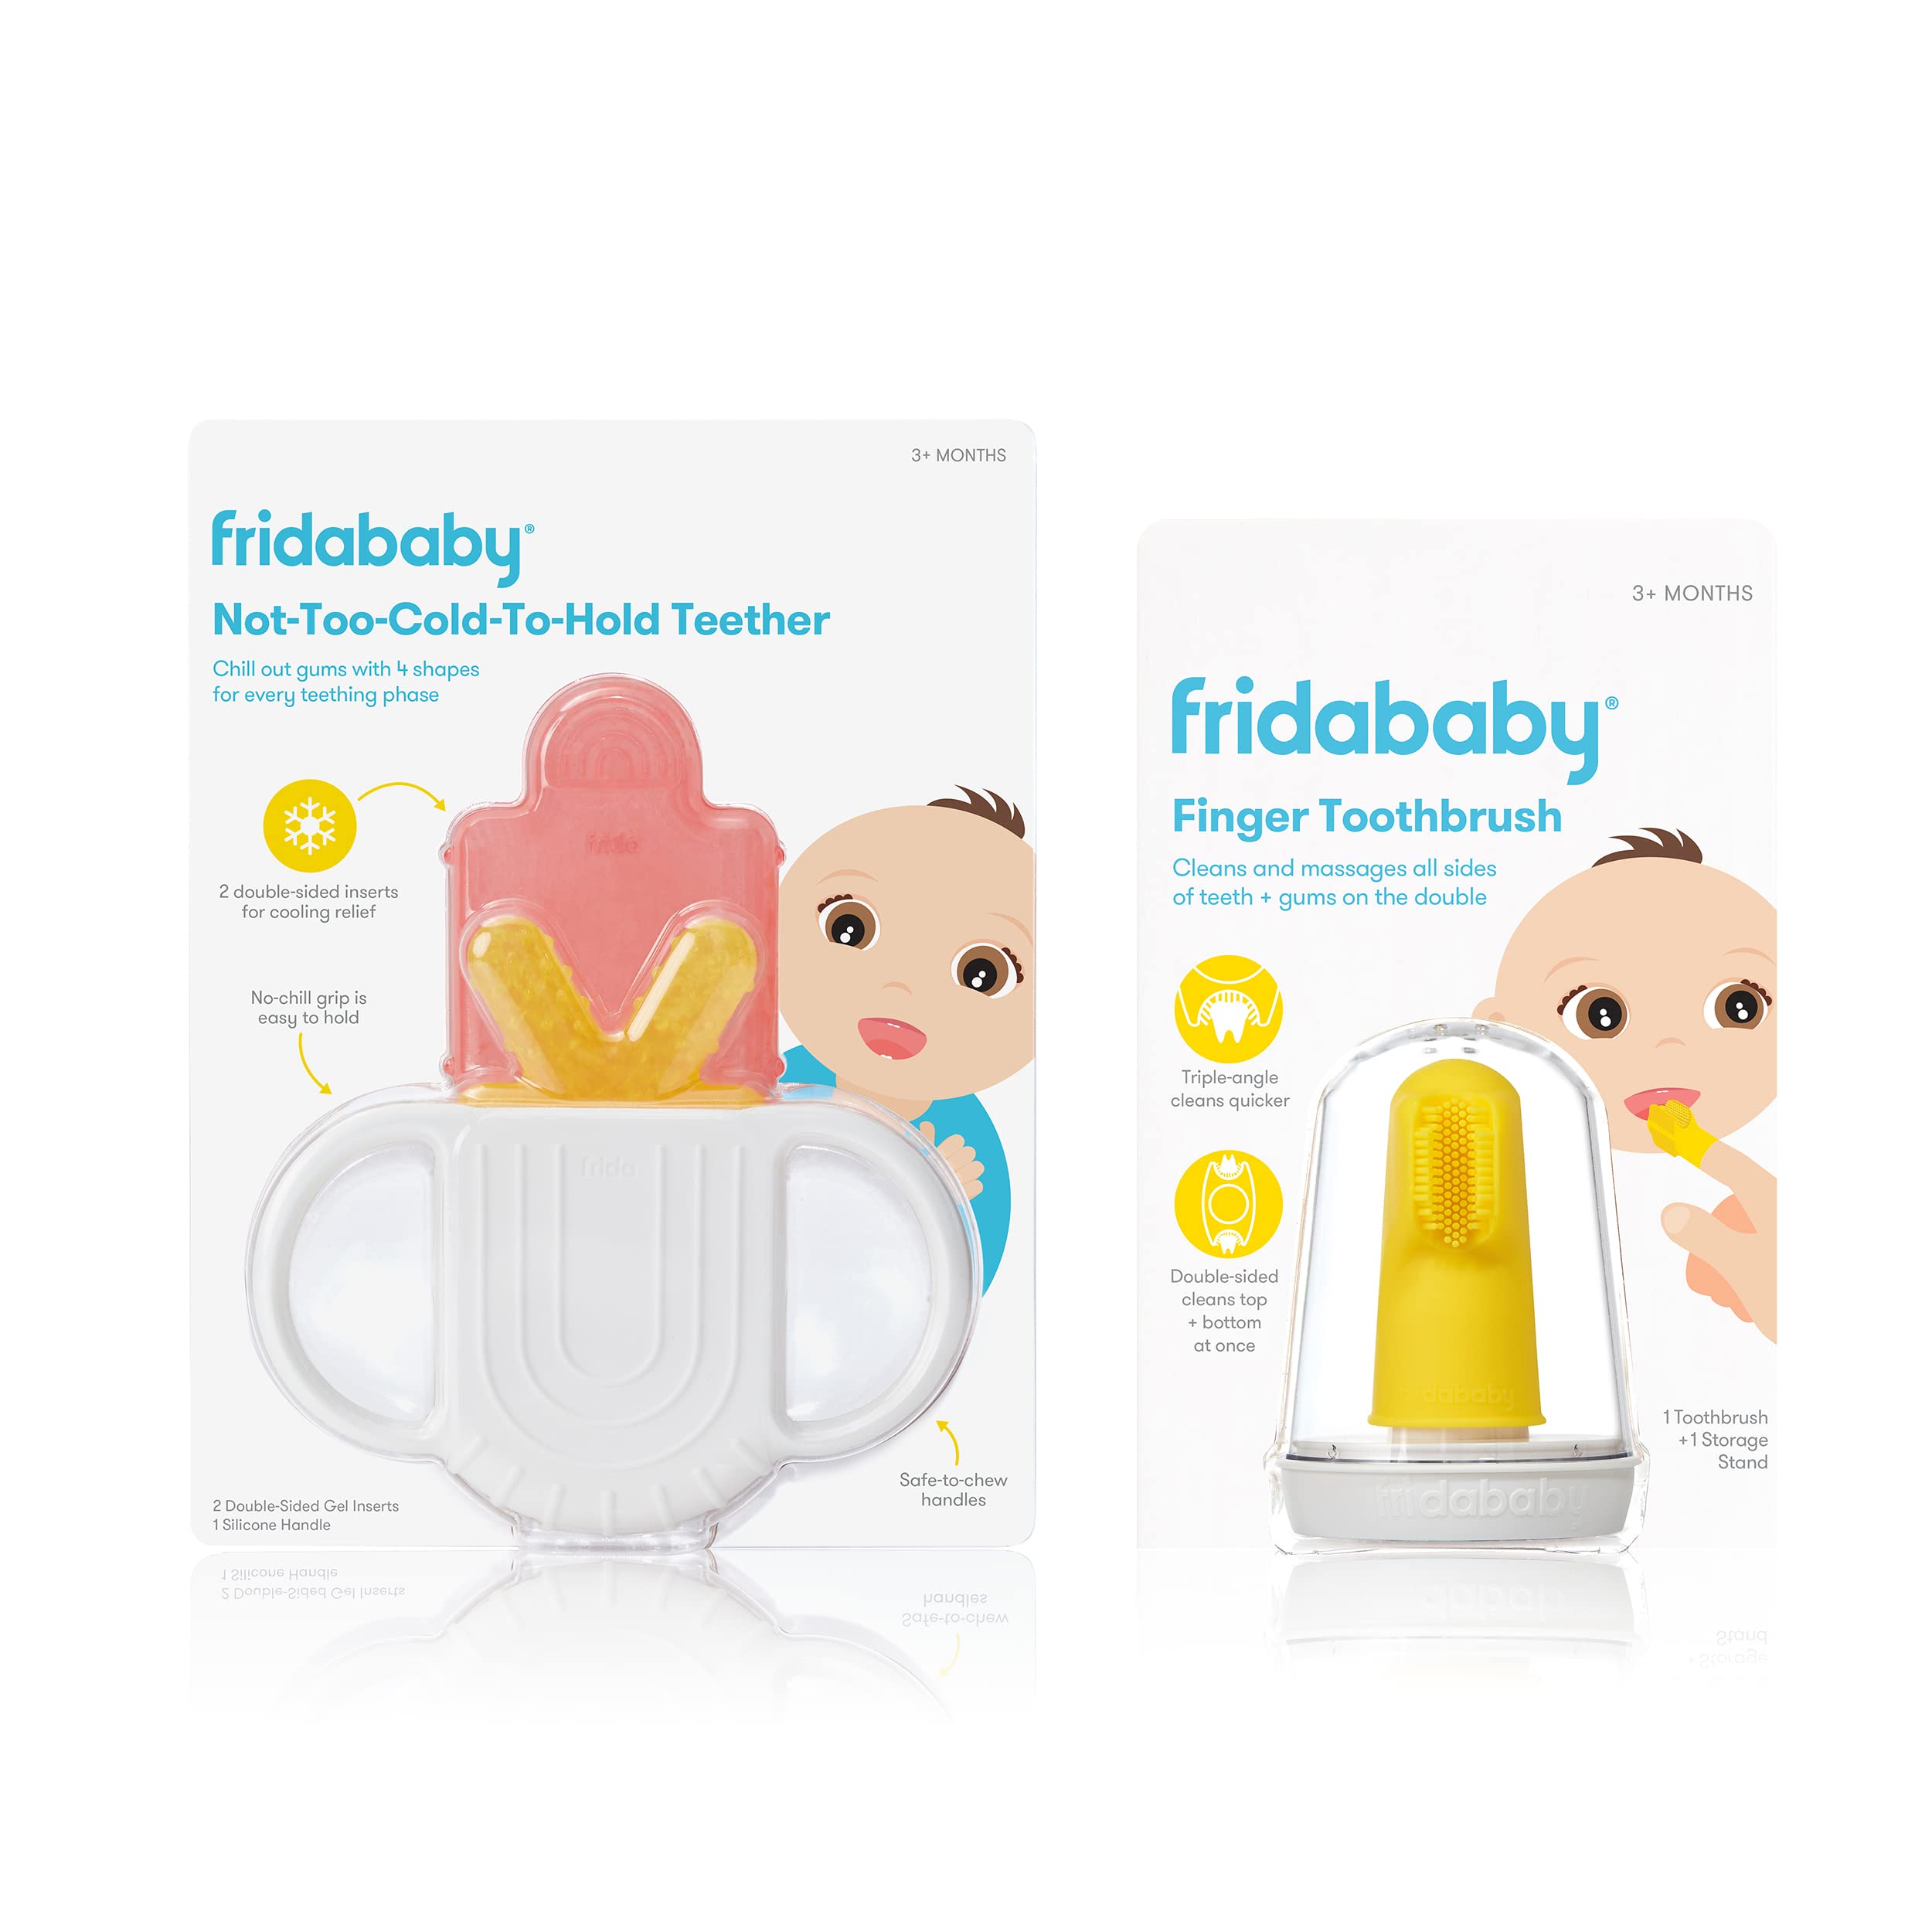 Not-Too-Cold-to-Hold Teether + SmileFrida Finger Toothbrush for Babies by Frida Baby